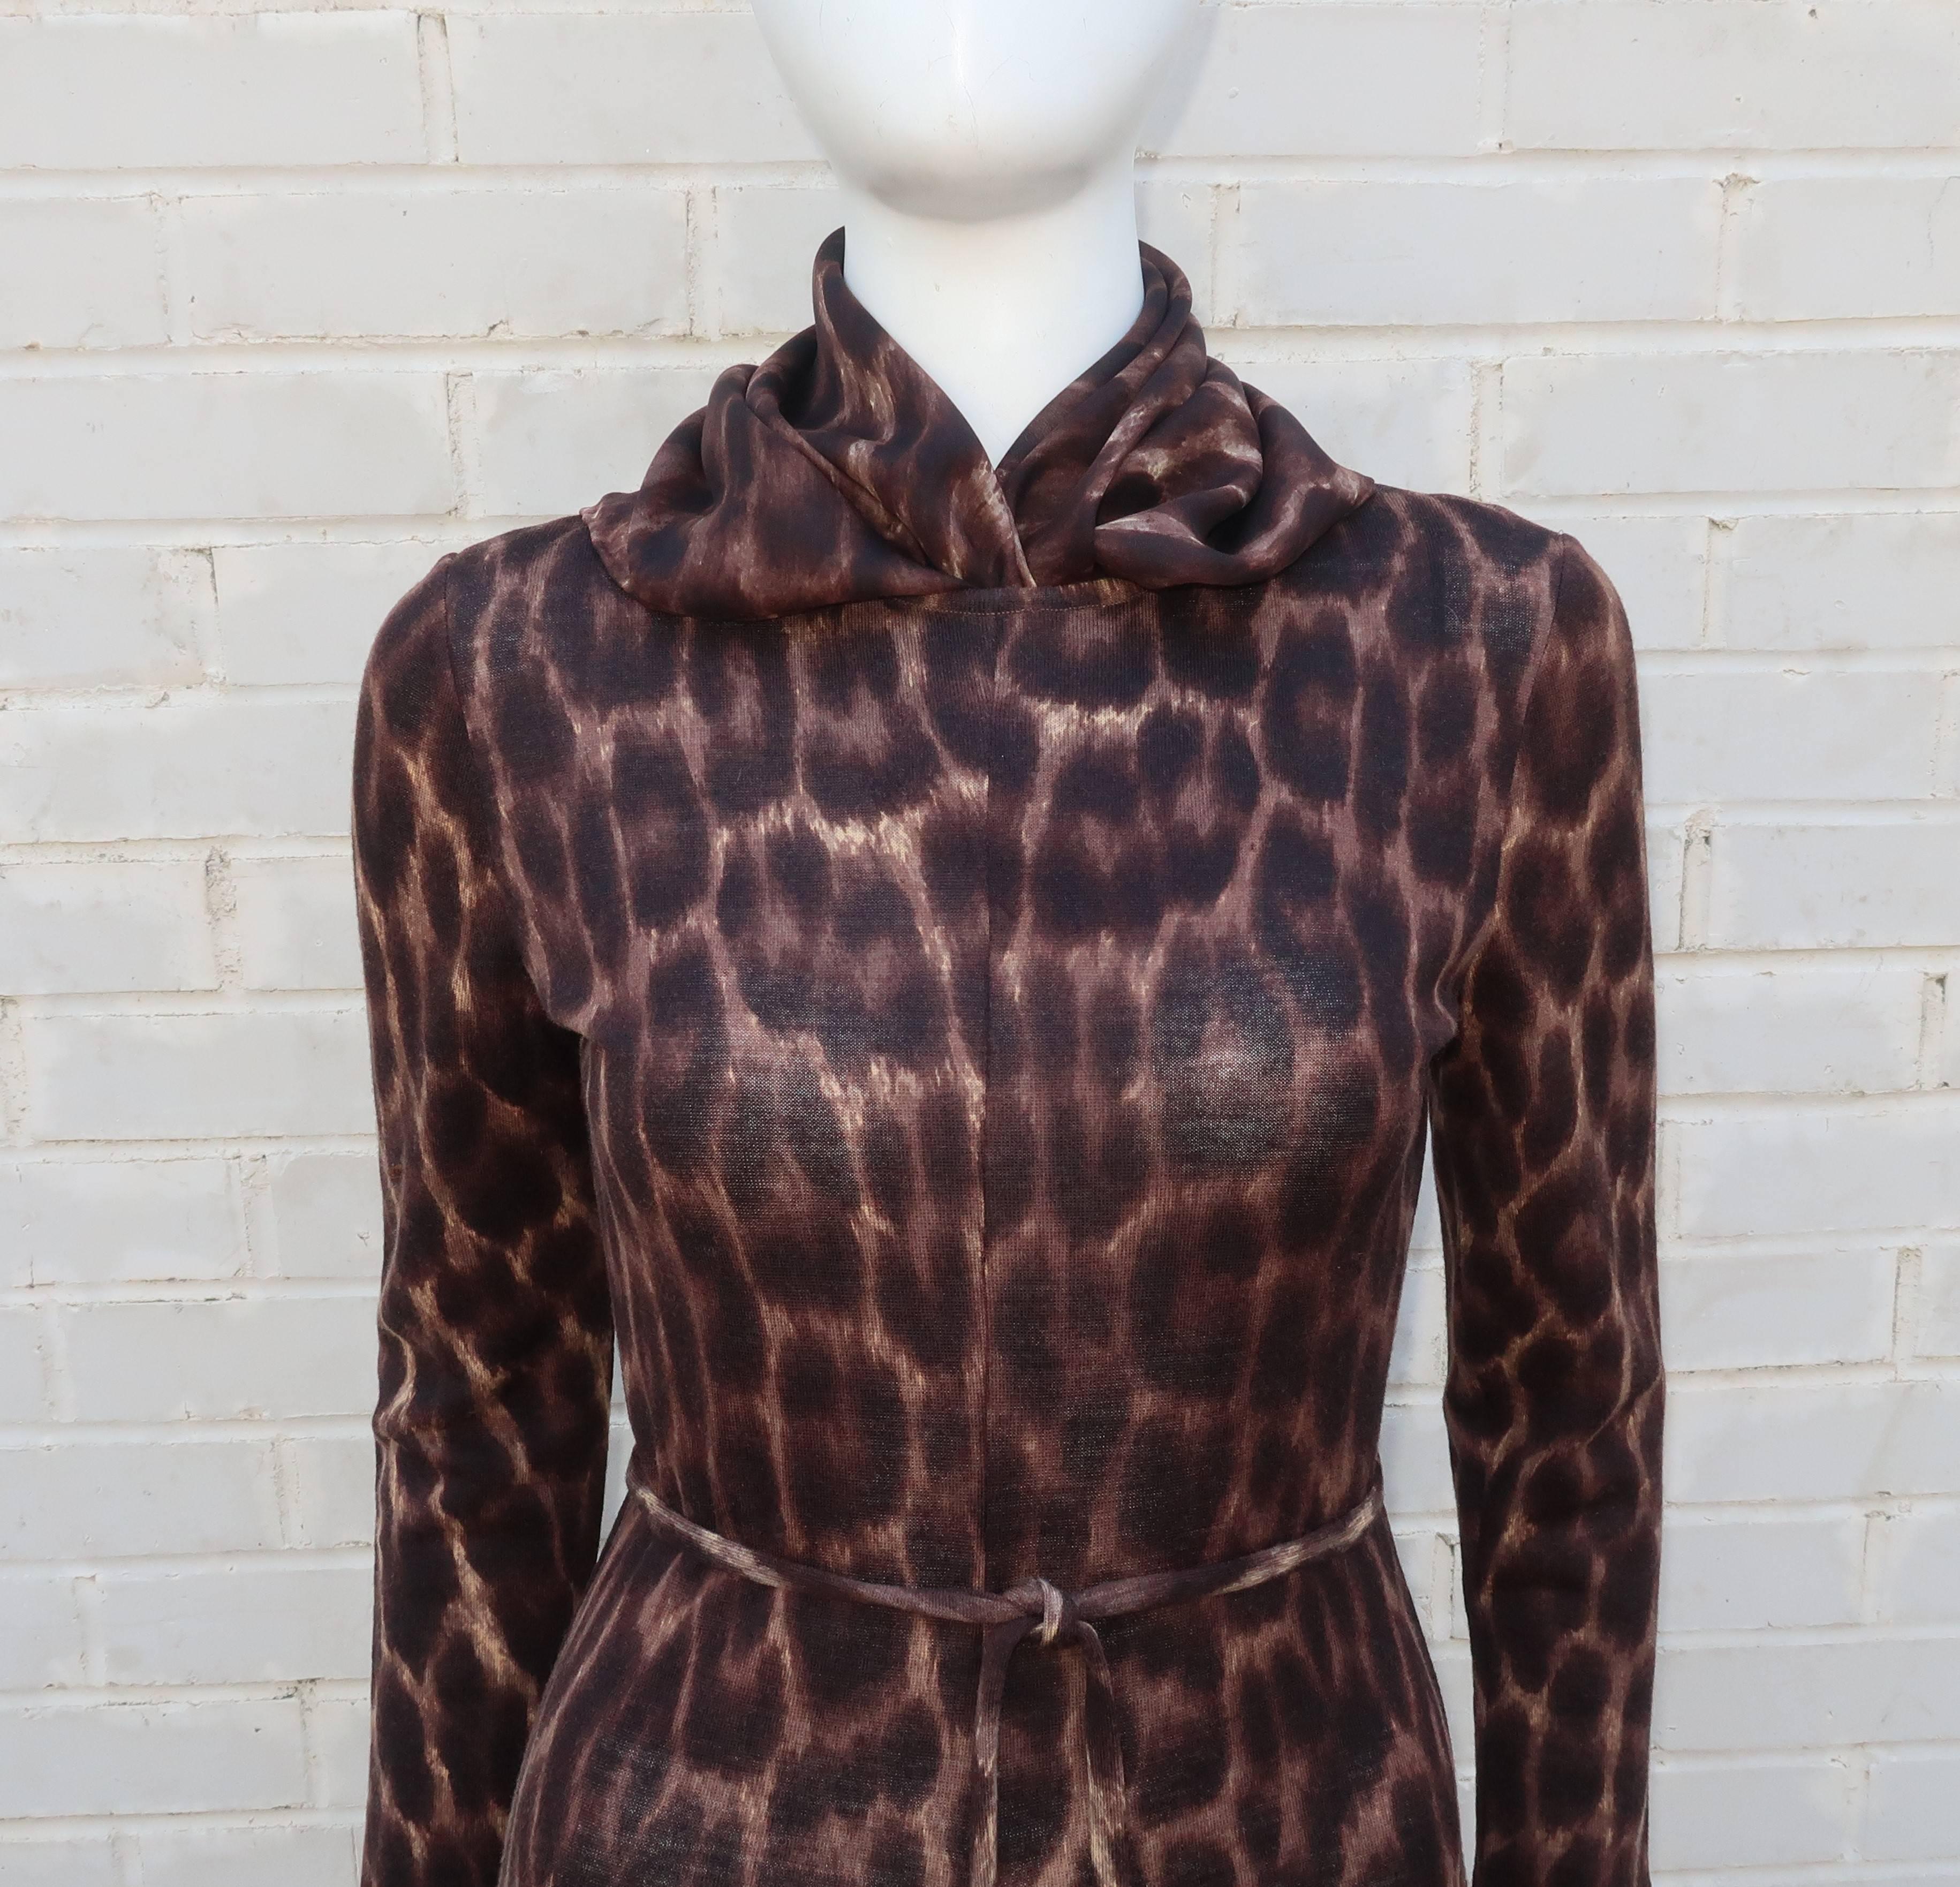 Purrrrrfect!  If Catwoman needs a 'ladies who lunch' ensemble ... this animal printed wool knit dress by Goldworm with scarf and belt is it!  The simple dress zips and hooks at the back with a collarless neckline and a flared skirt all in a cheetah